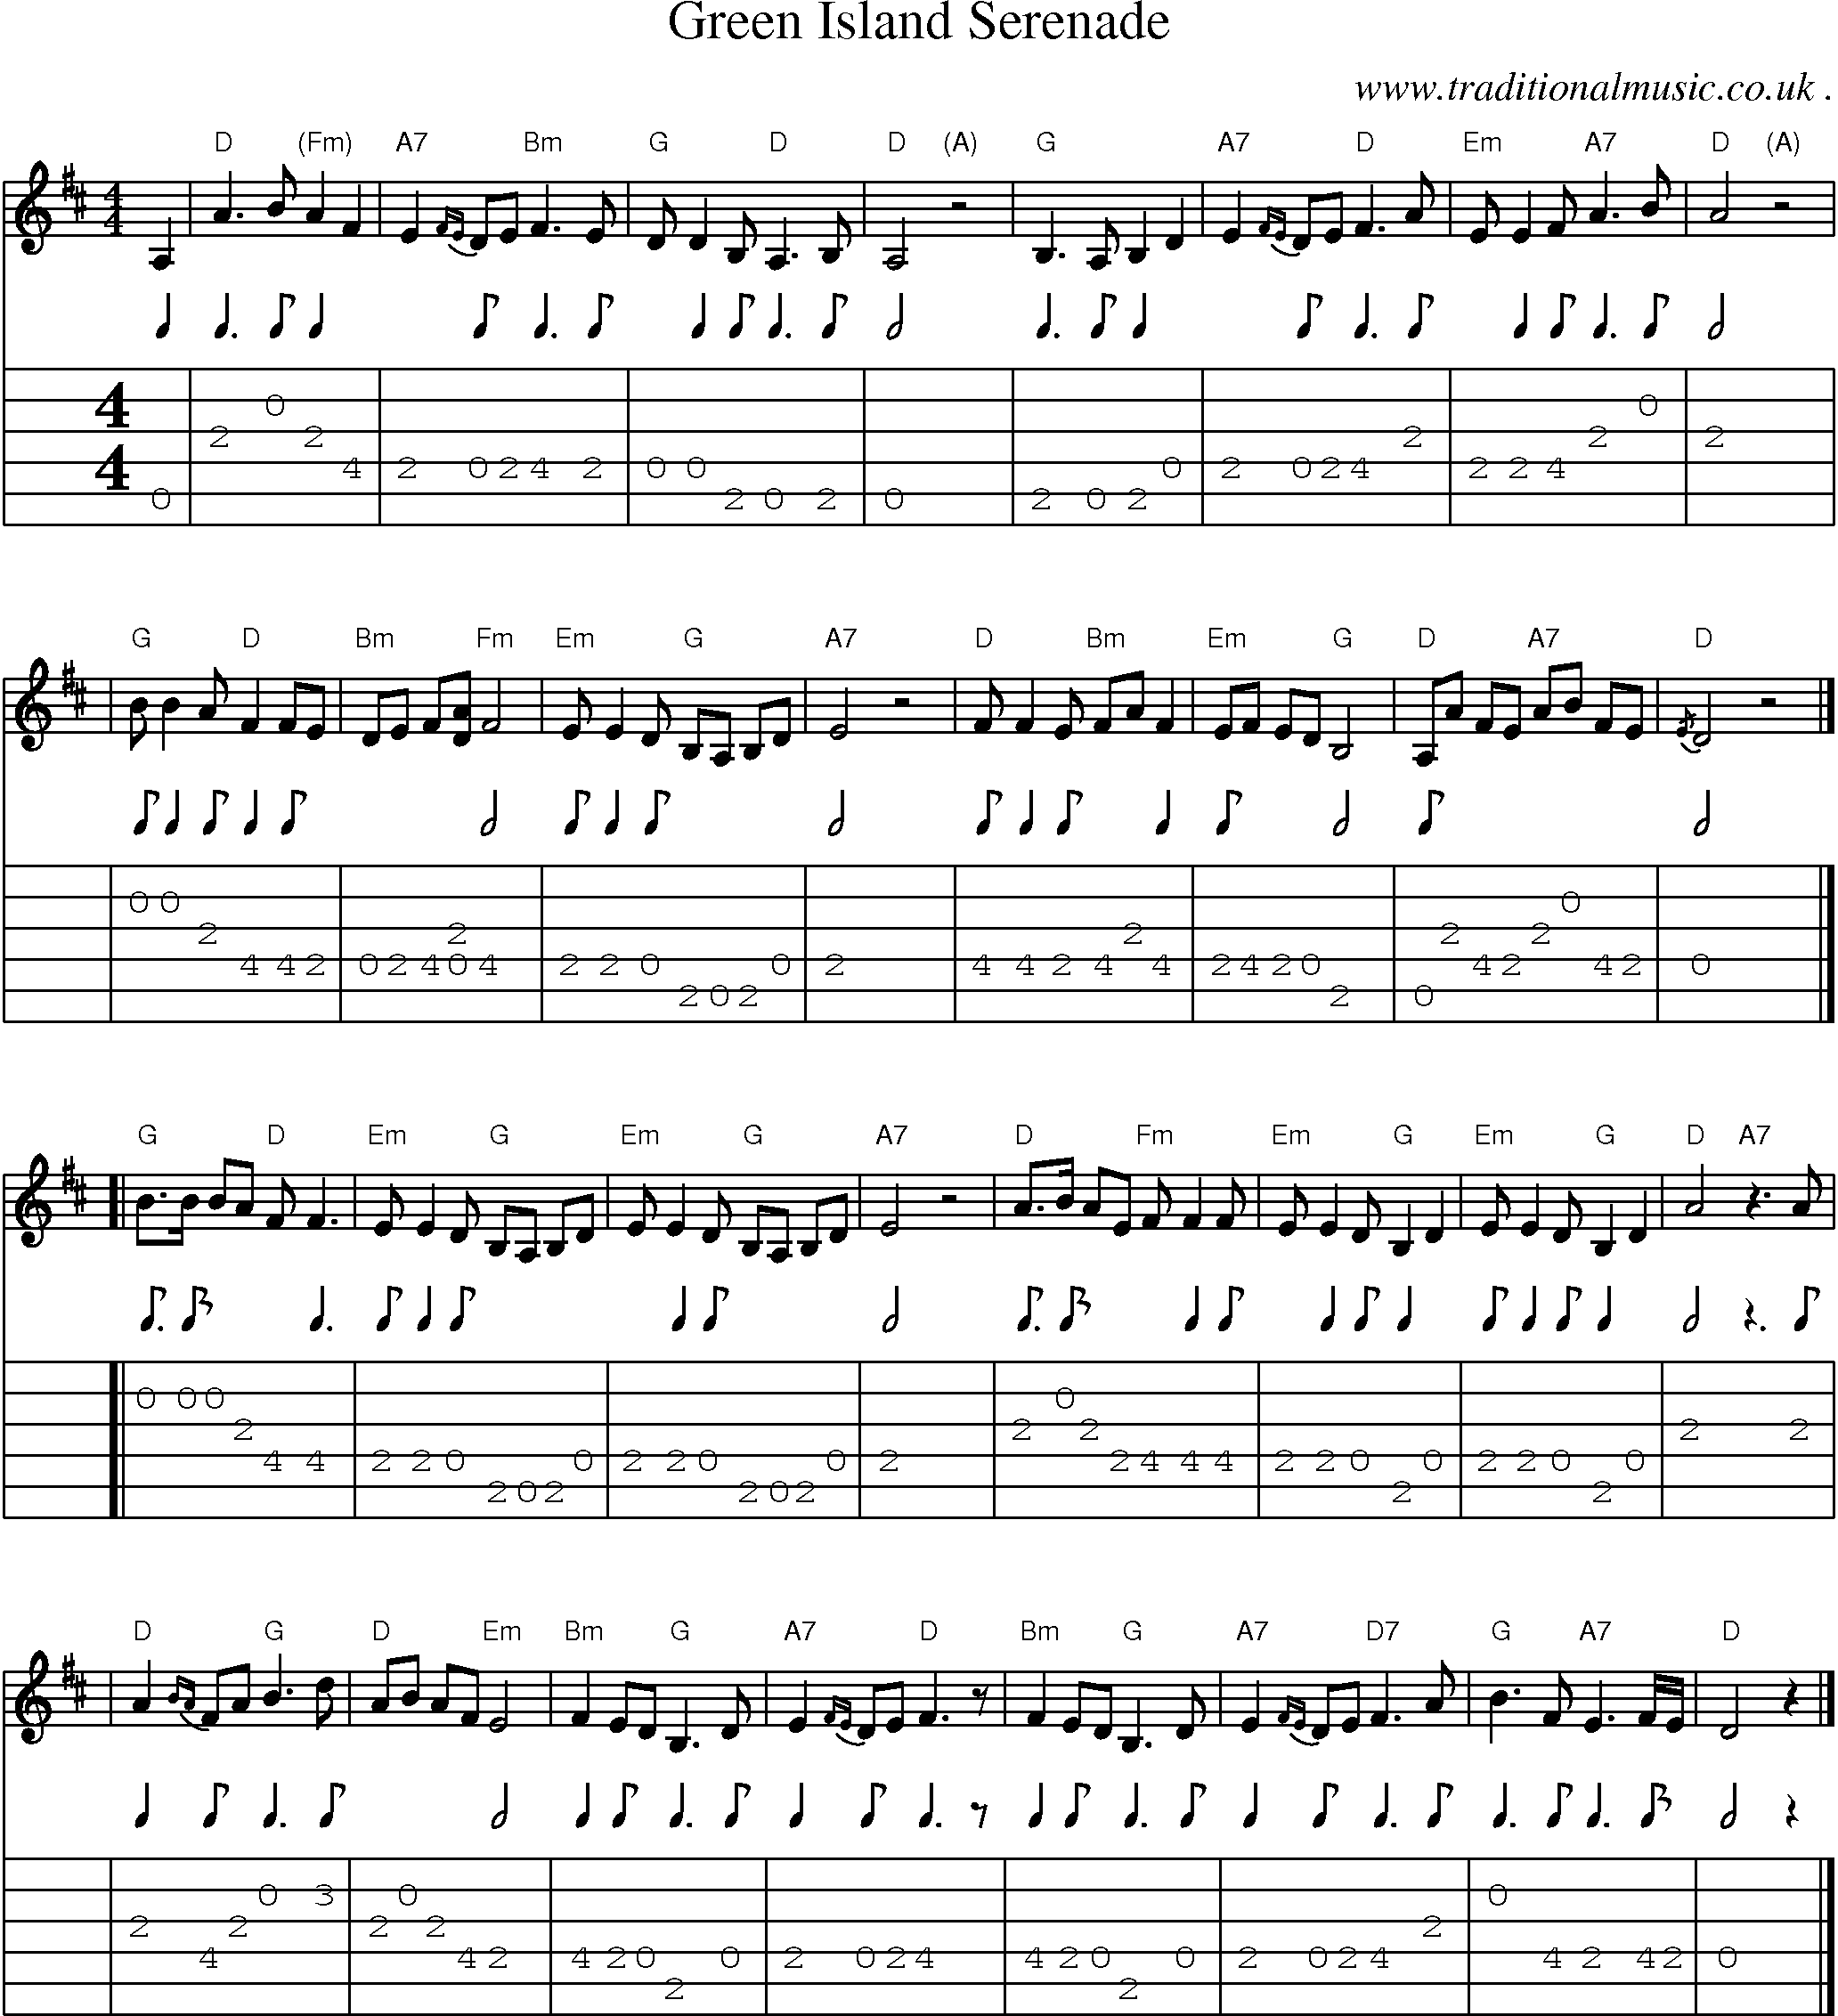 Sheet-music  score, Chords and Guitar Tabs for Green Island Serenade